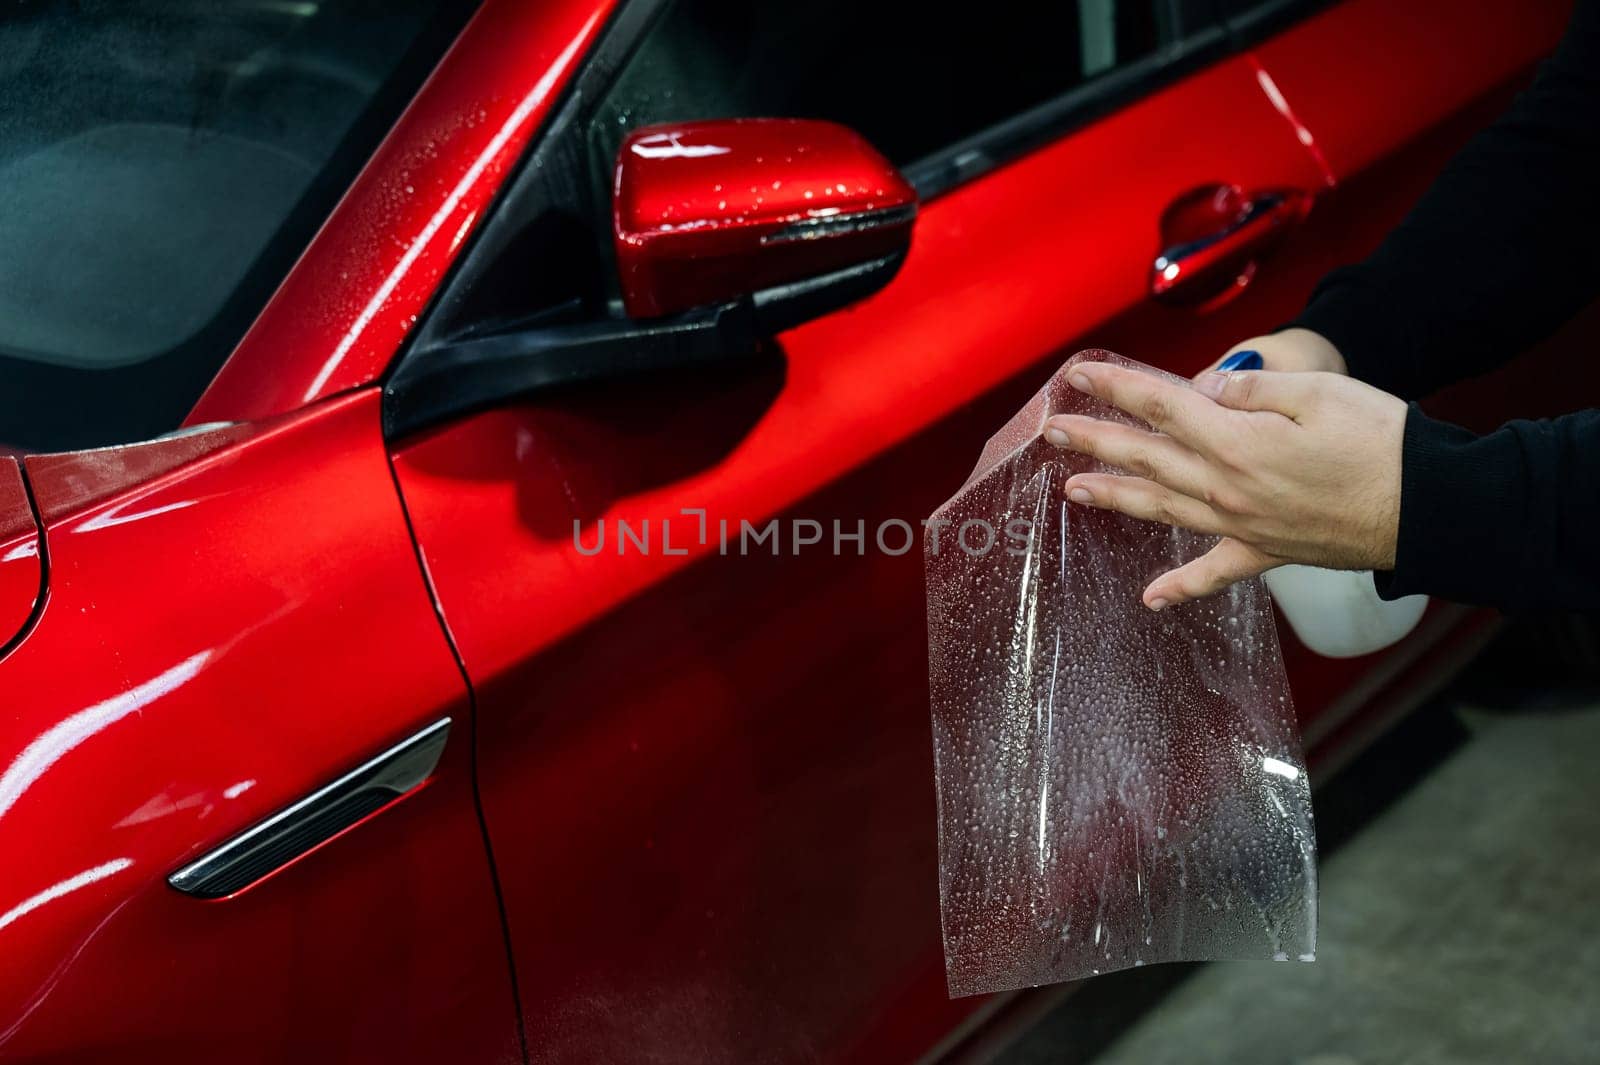 A technician sprays water before applying protective vinyl film to a car. by mrwed54